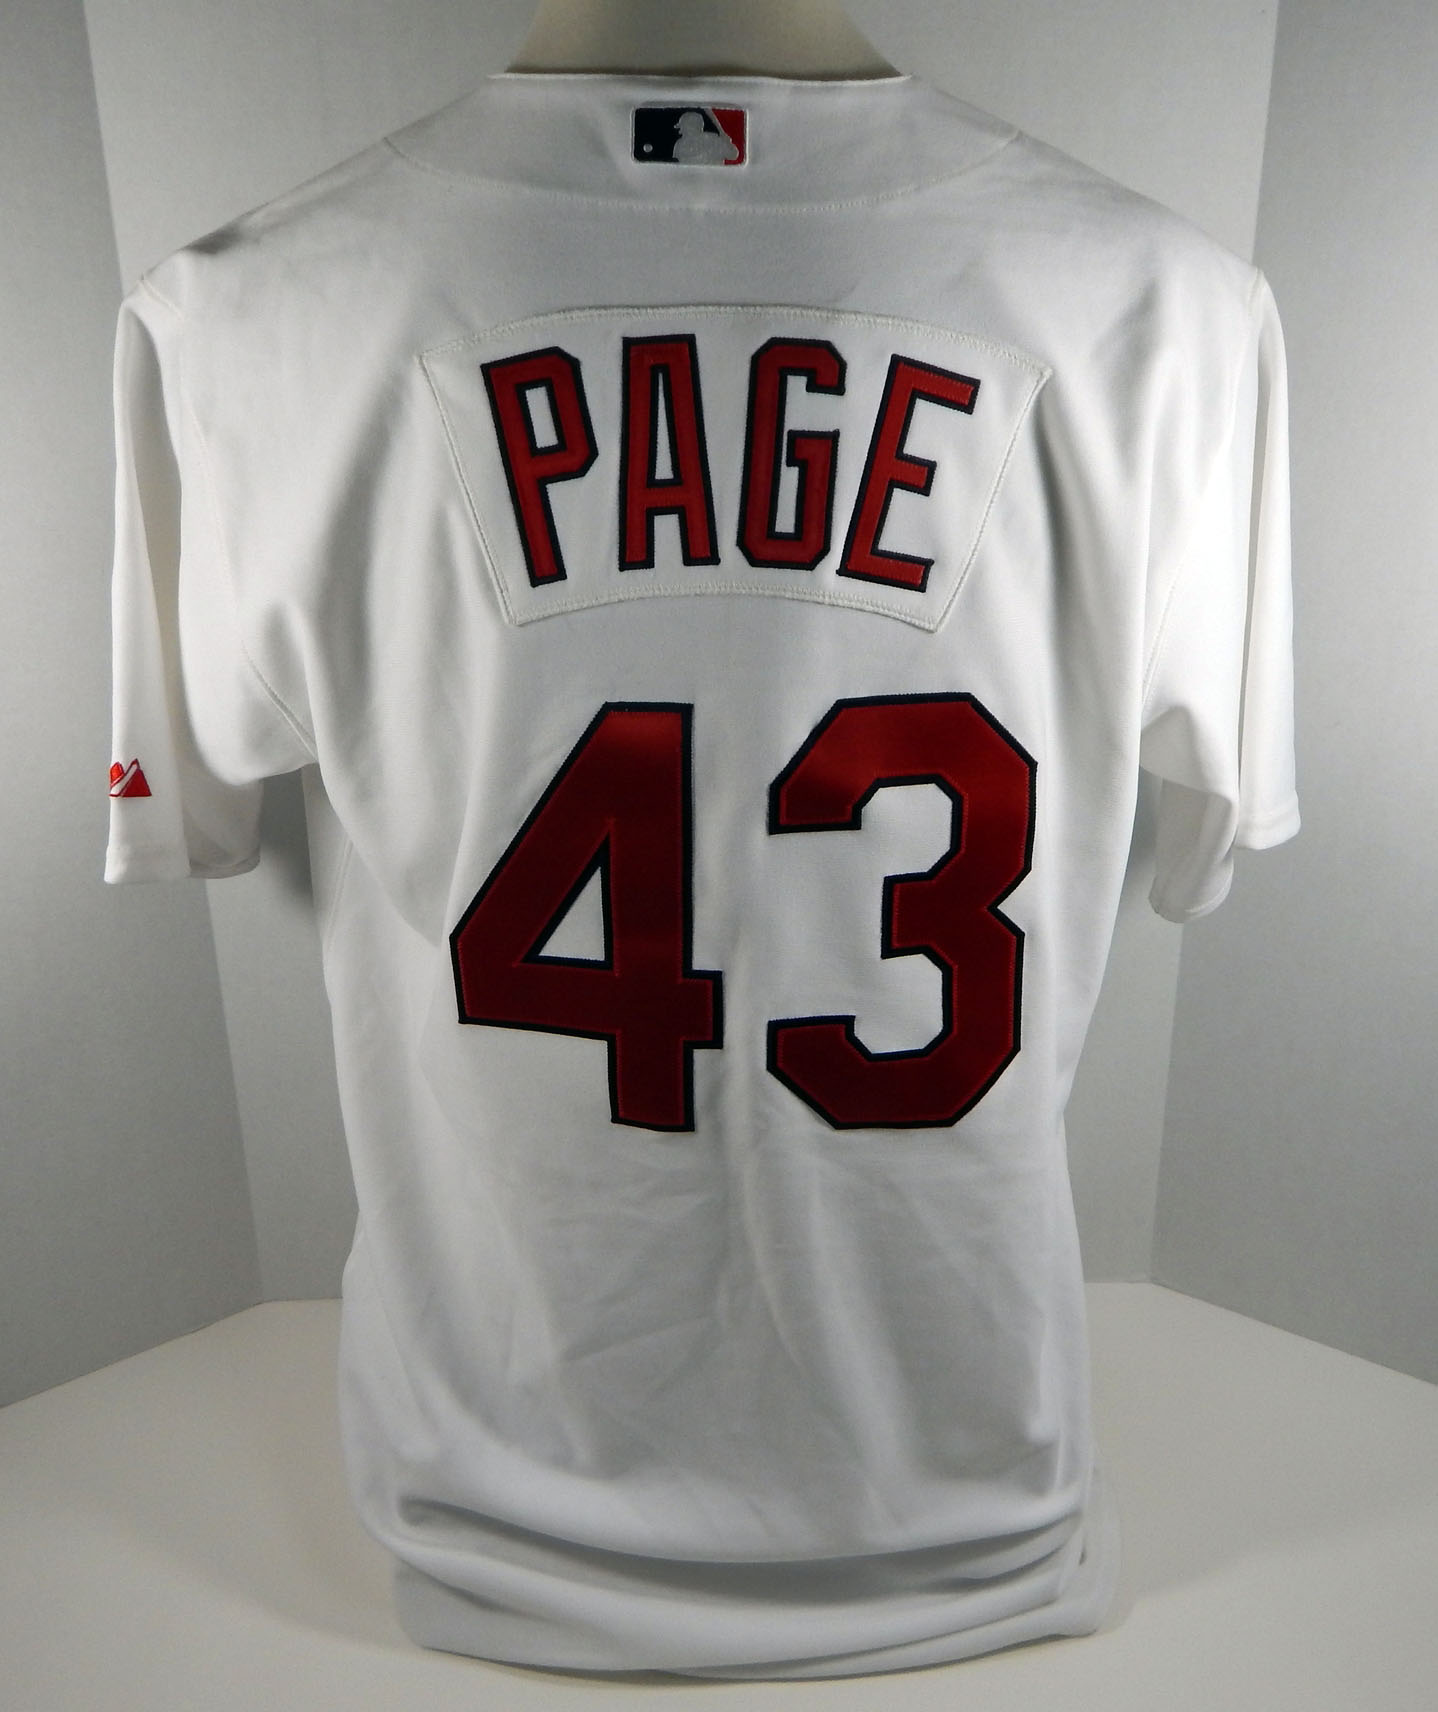 St. Louis Cardinals Mitchell Page #43 Game Used White Jersey | eBay